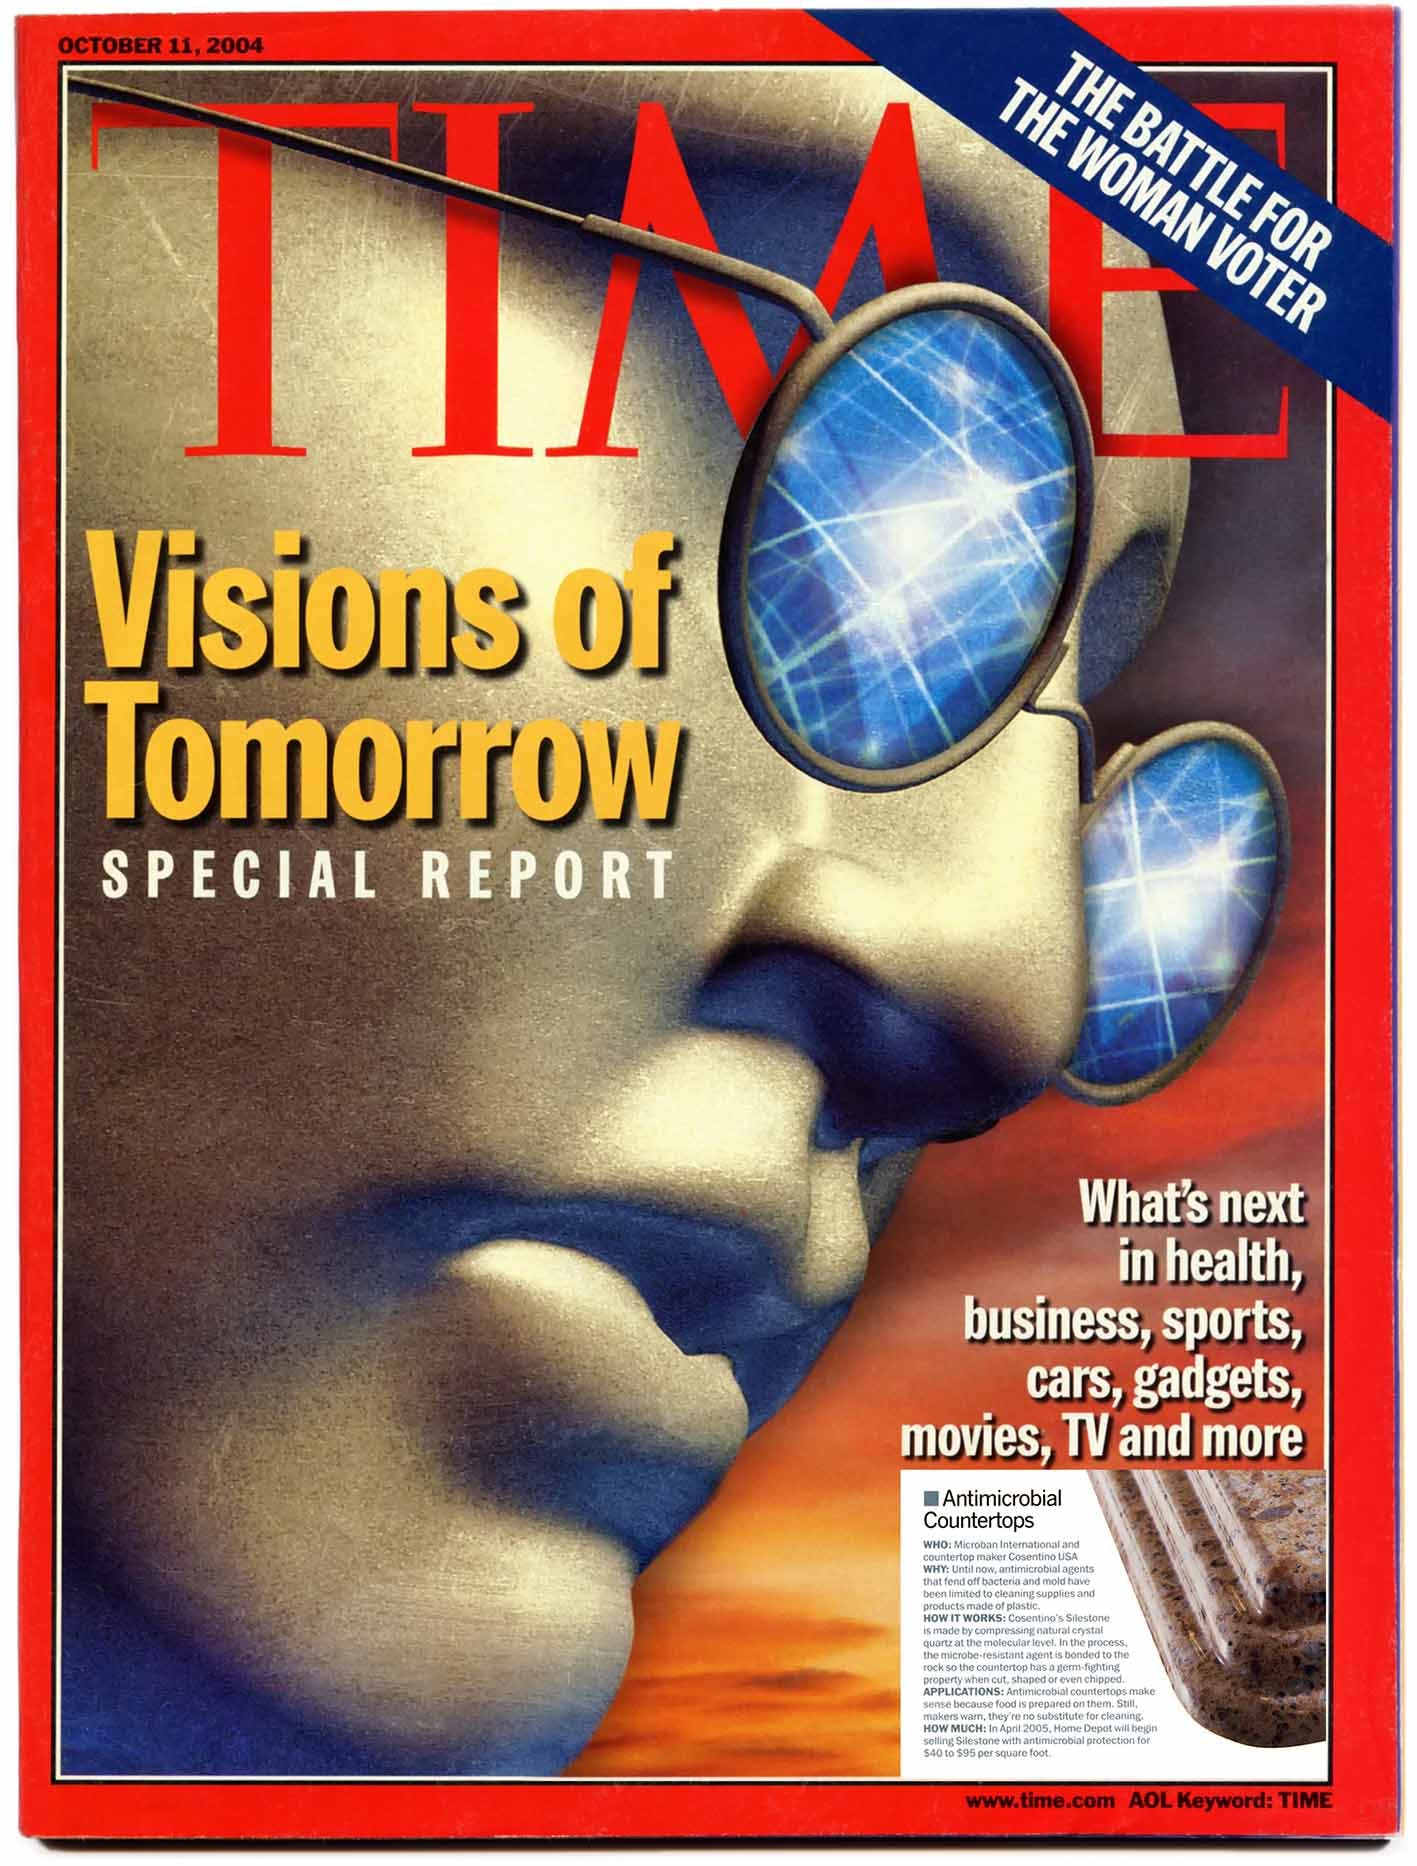 Image of 2004 Revista Times Visions of Tomorrow baja 1 1 in Cosentino, 40 years of international growth and expansion - Cosentino